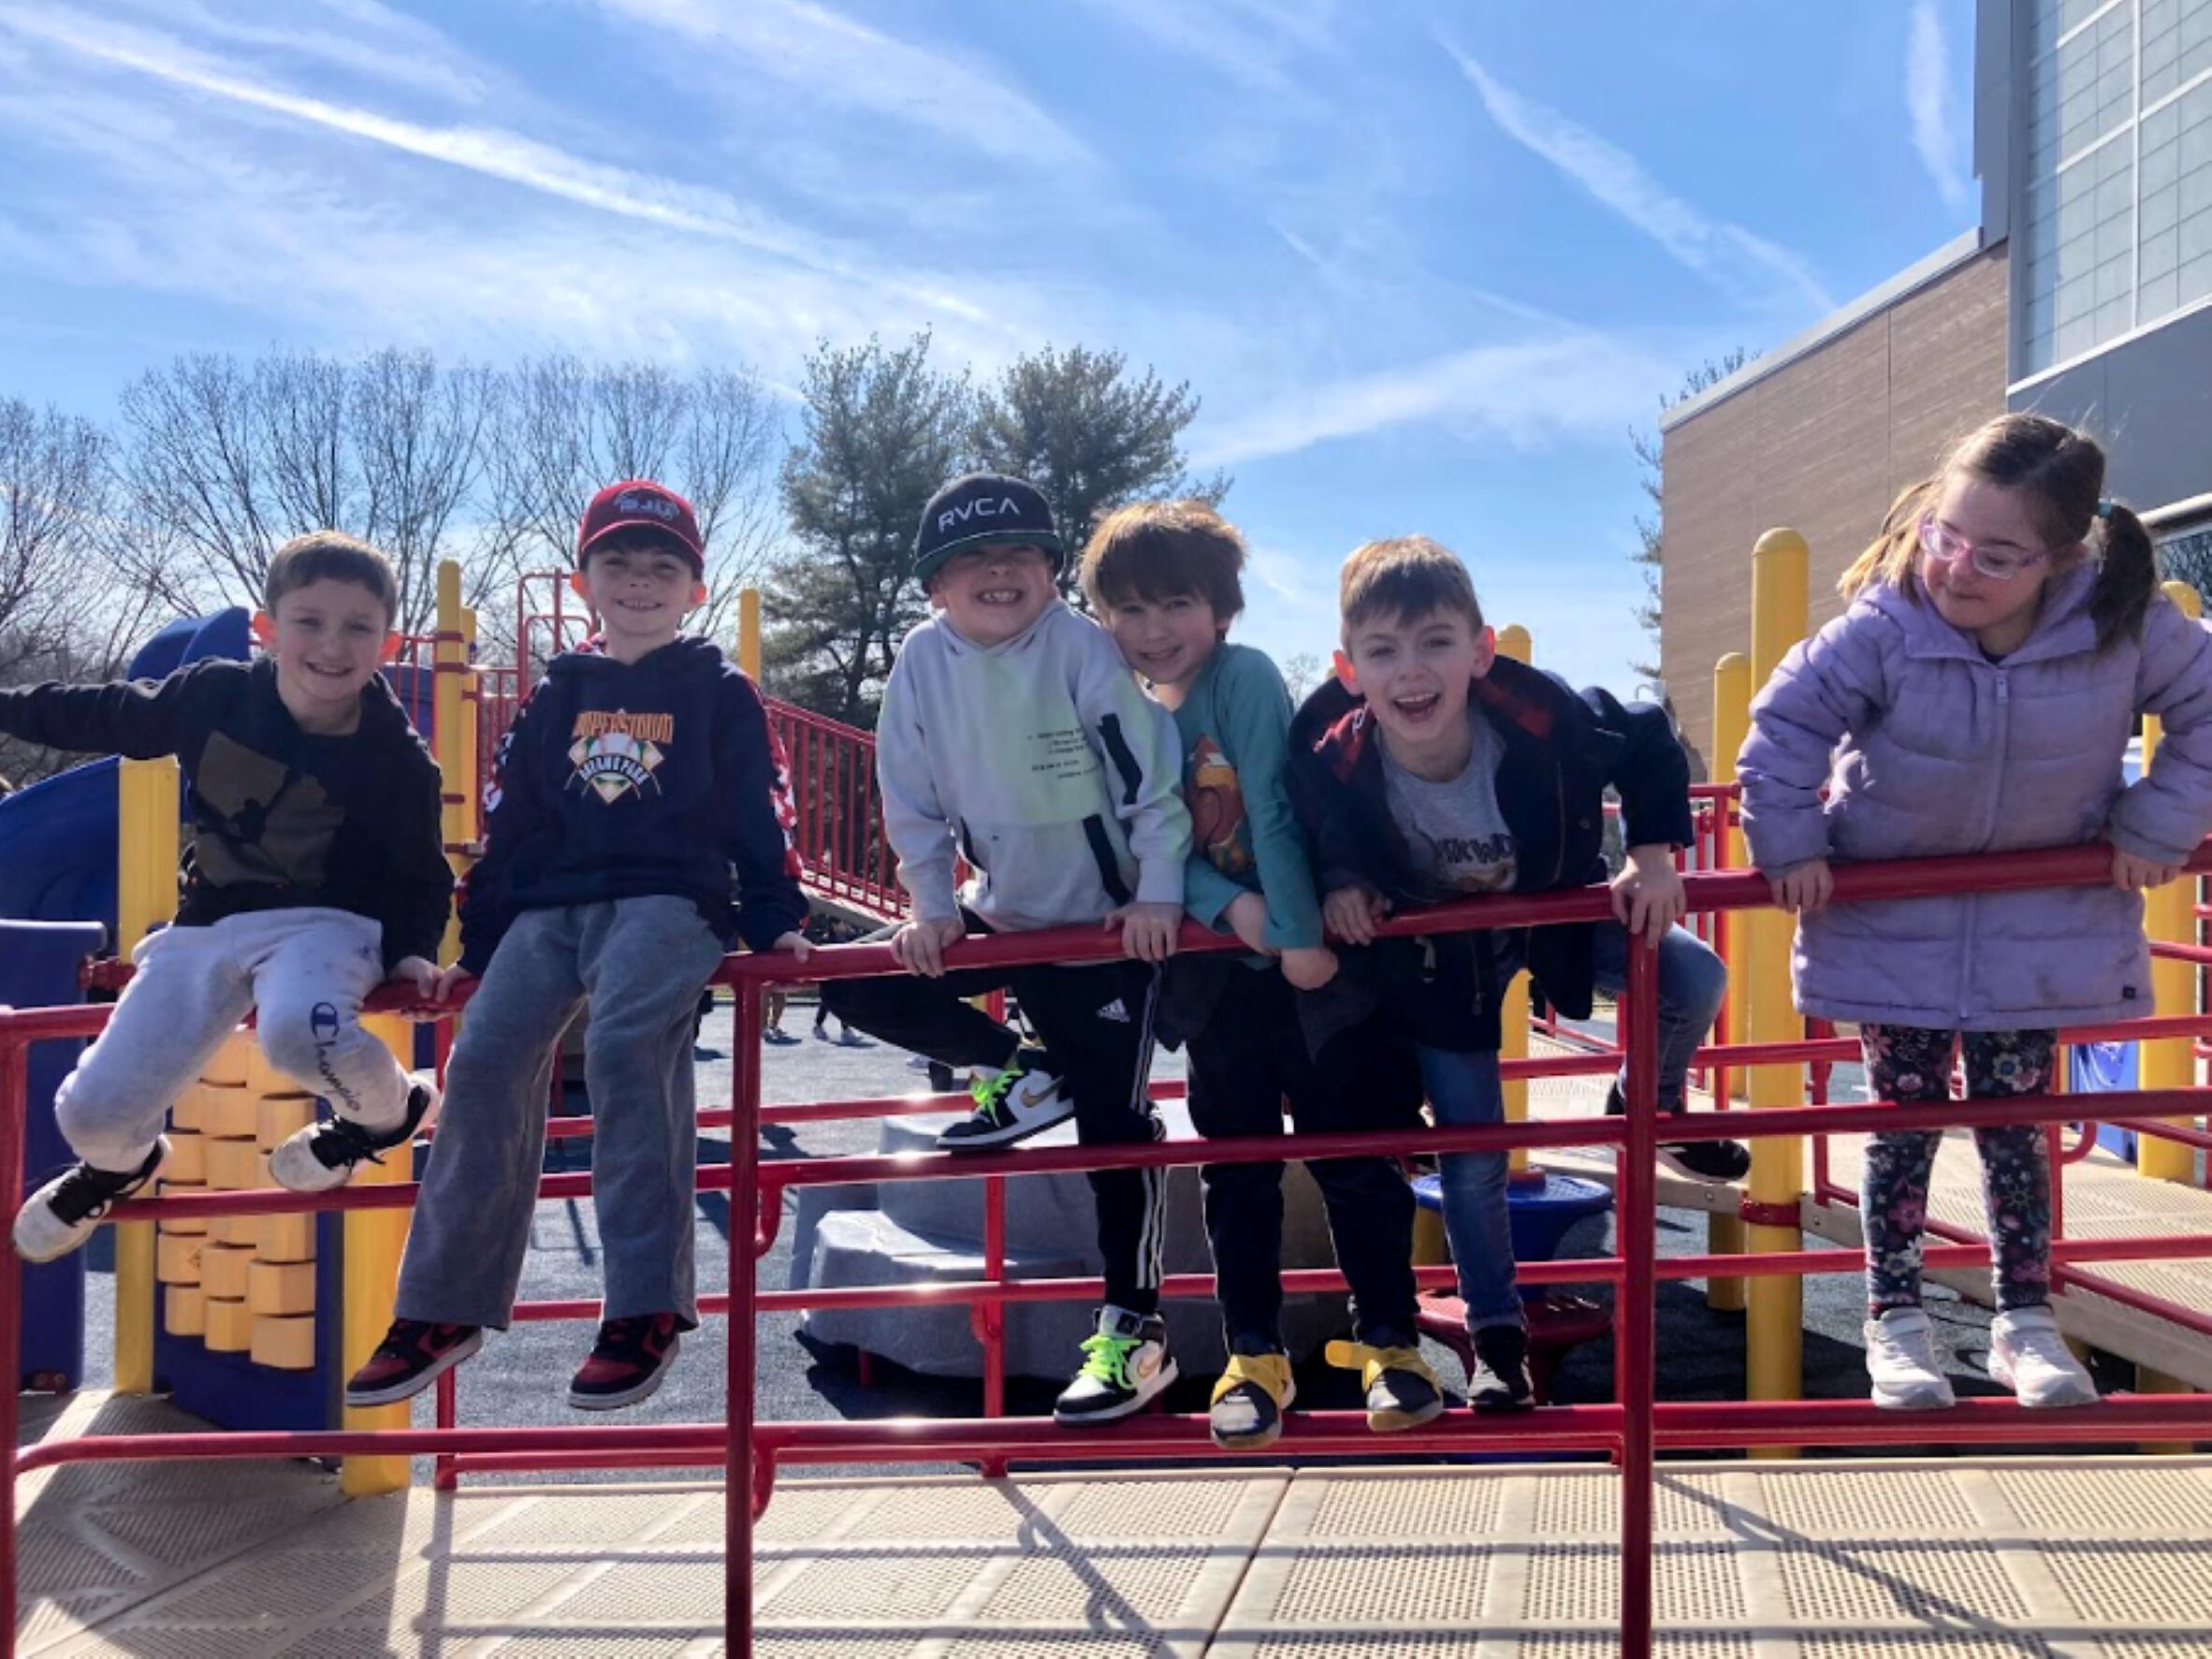 six students sitting and standing on a railing in the playground